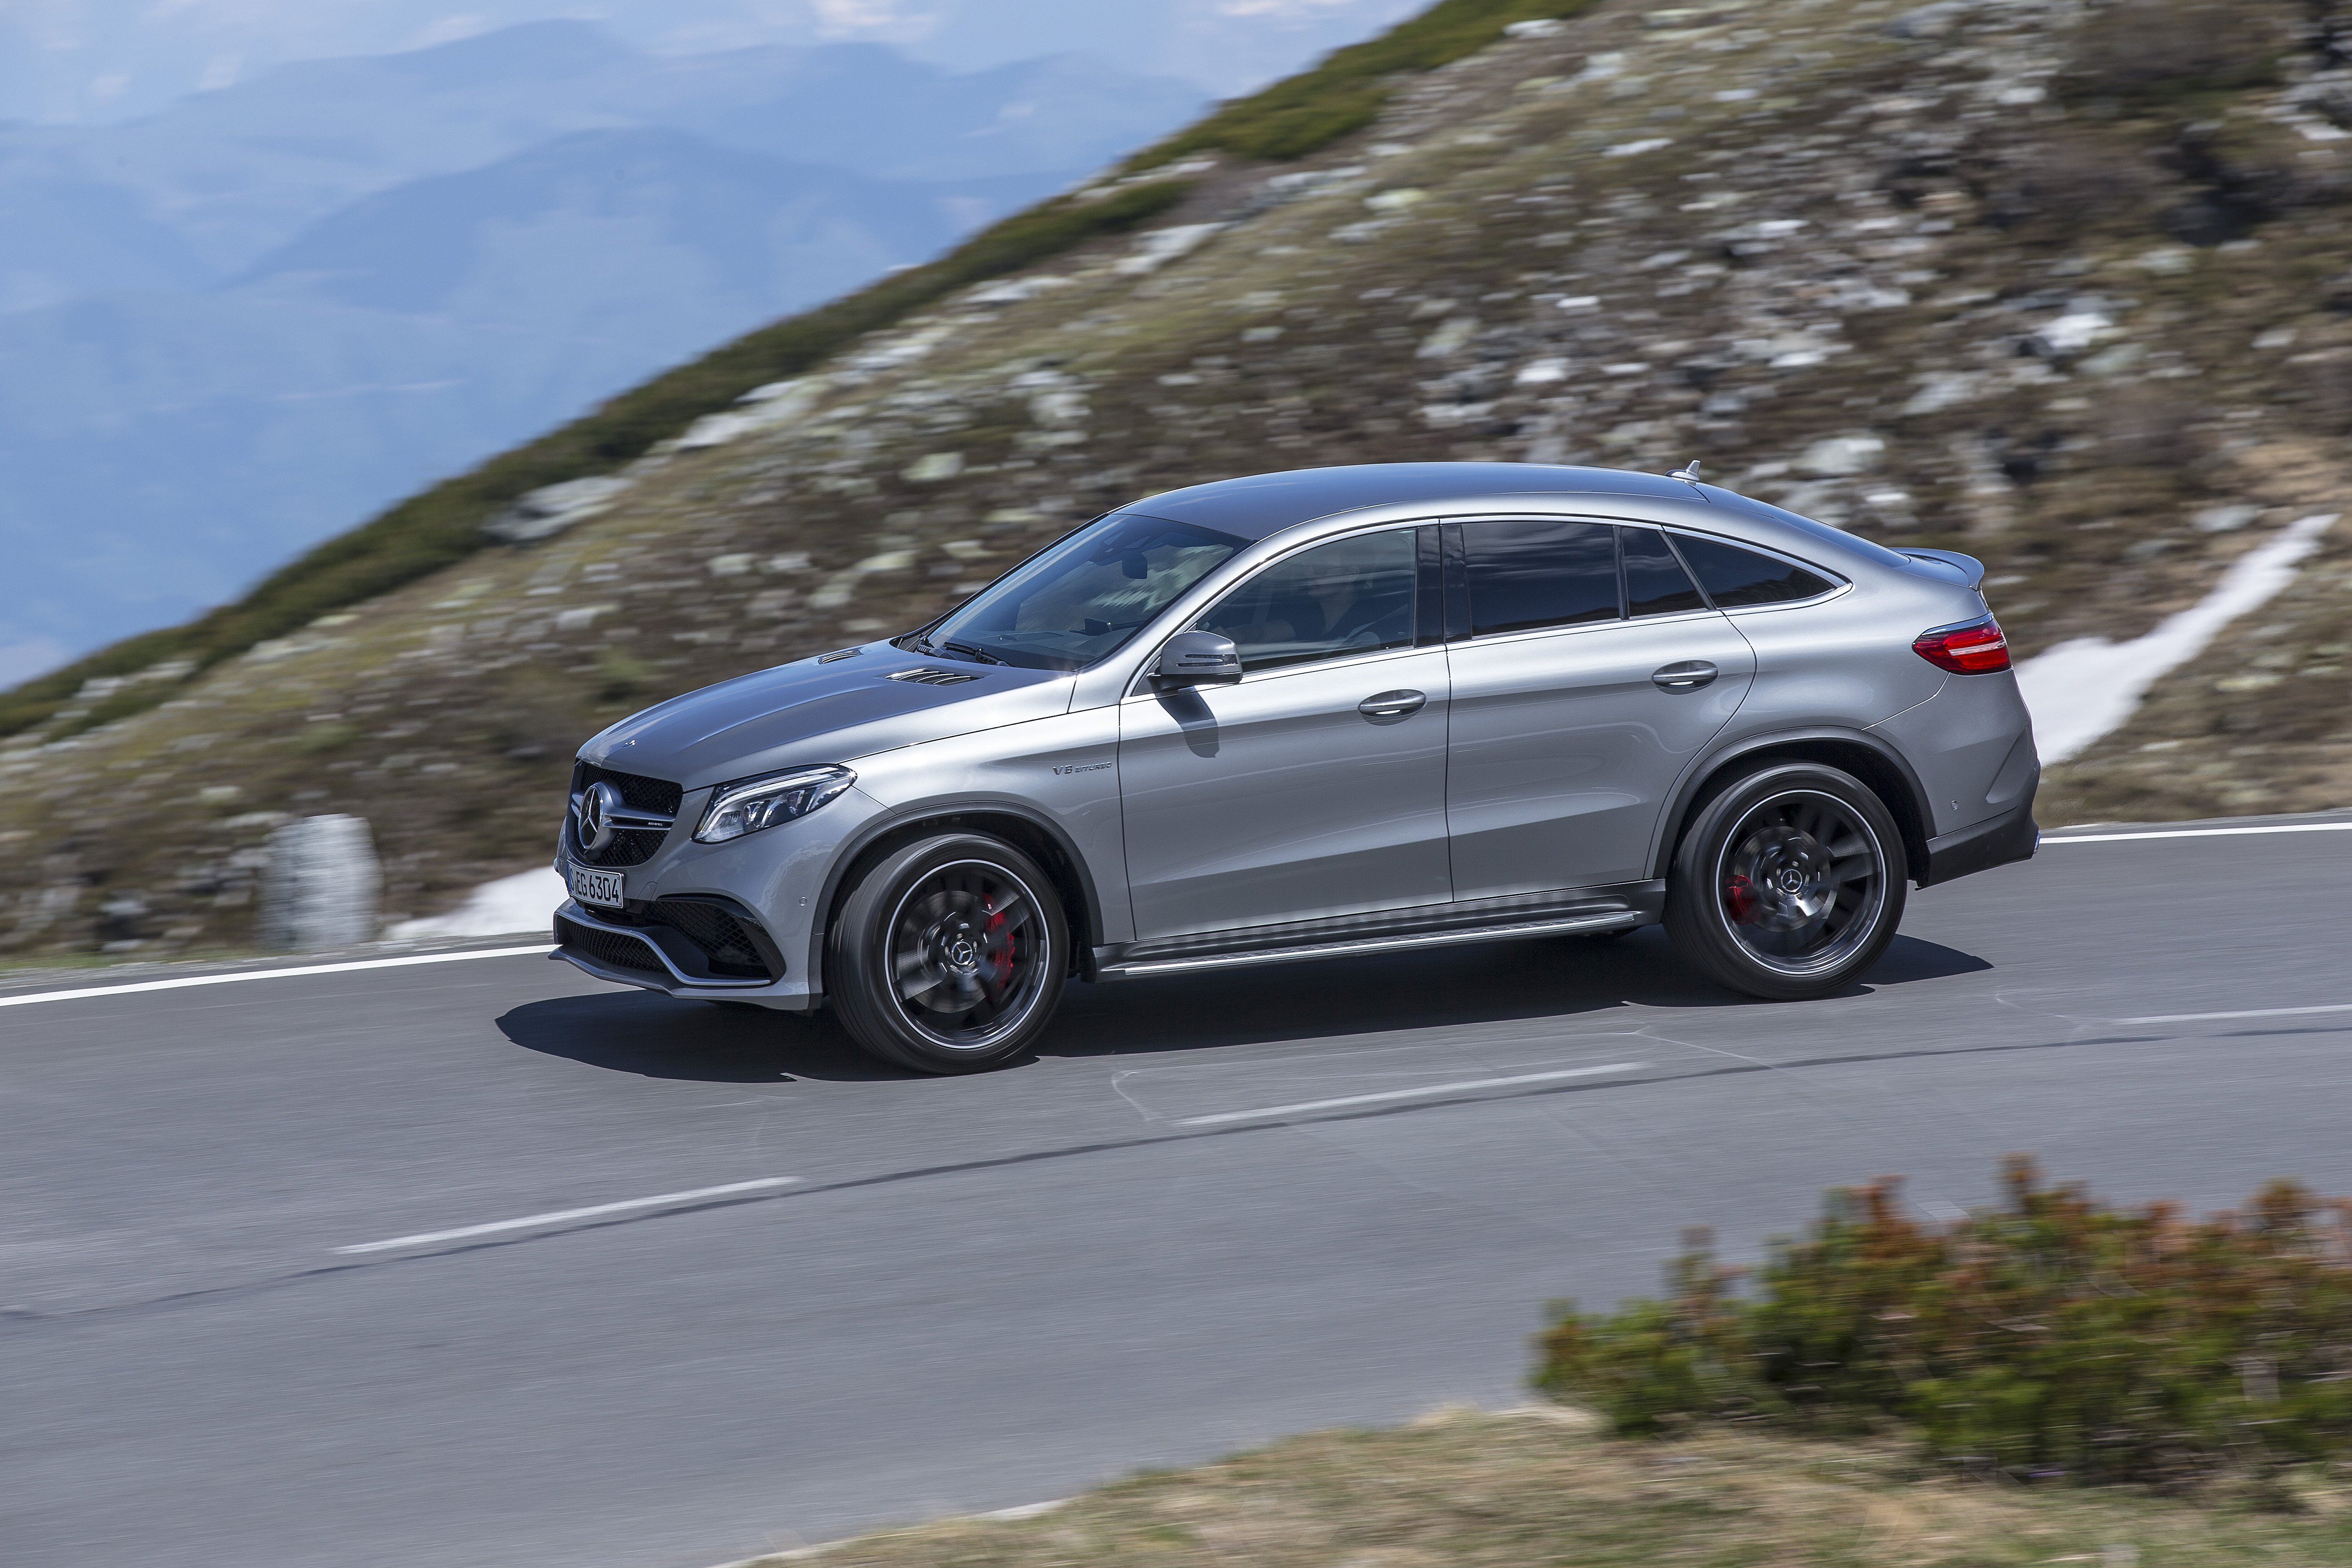 Mercedes GLE-Class SUV (W167) modern specifications